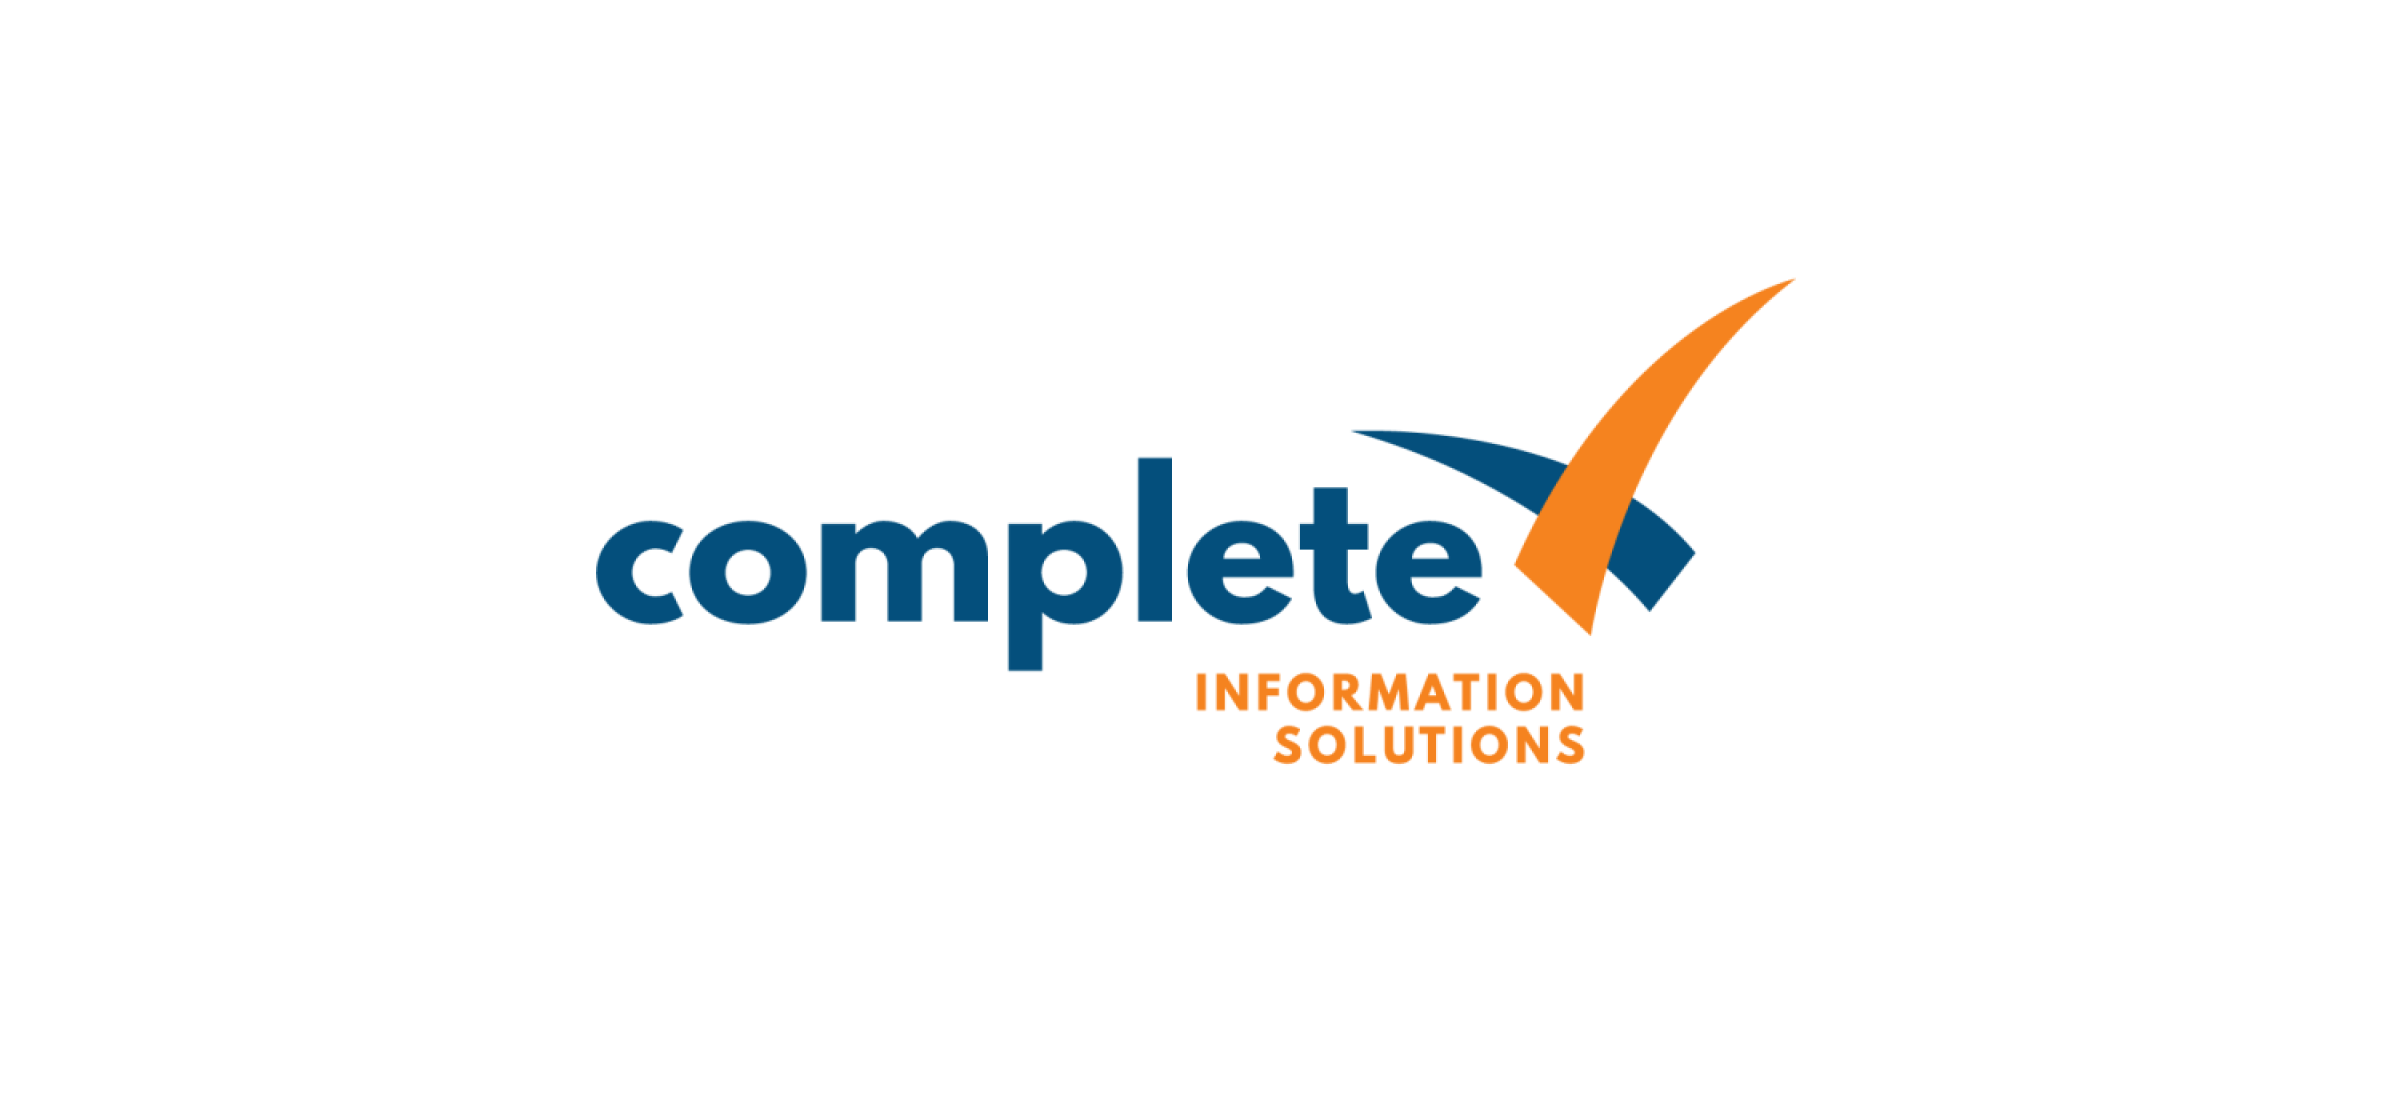 The About Complete Information Solutions logo